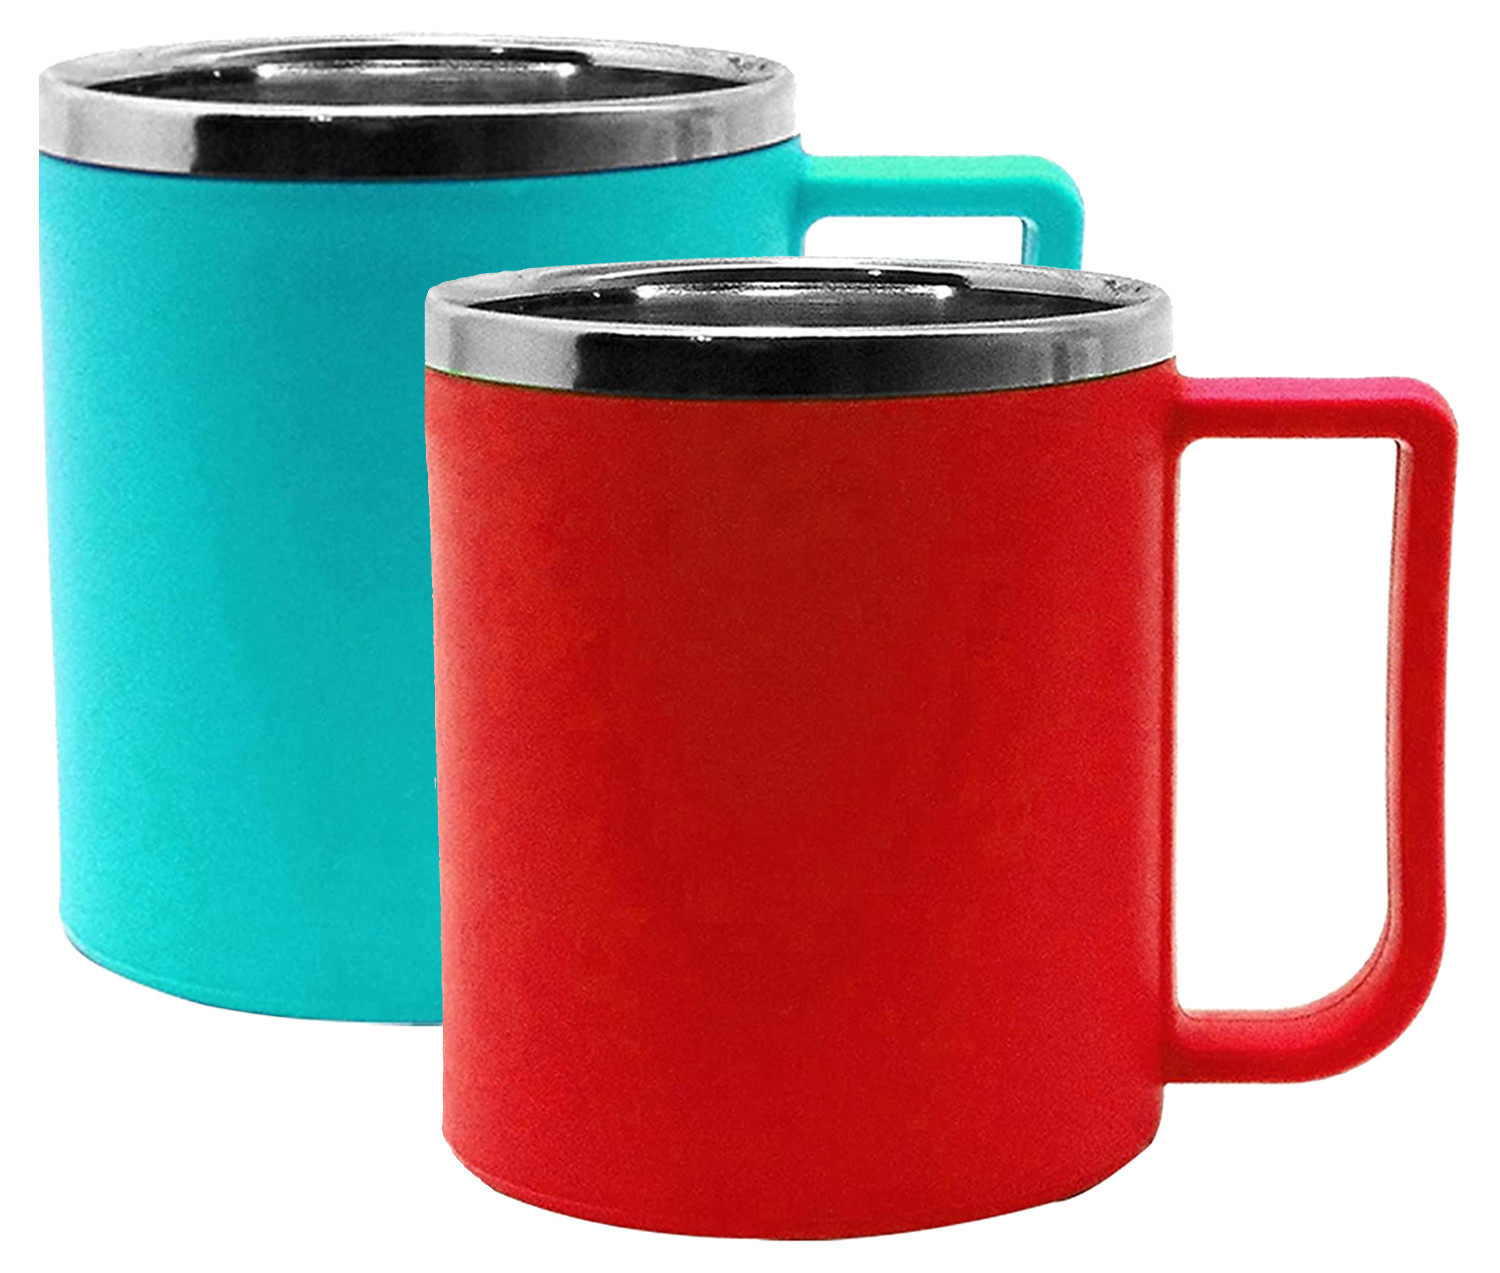 Kuber Industries Medium Size Plastic Steel Cups for Coffee Tea Cocoa, Camping Mugs with Handle, Portable & Easy Clean,(Green & Red)